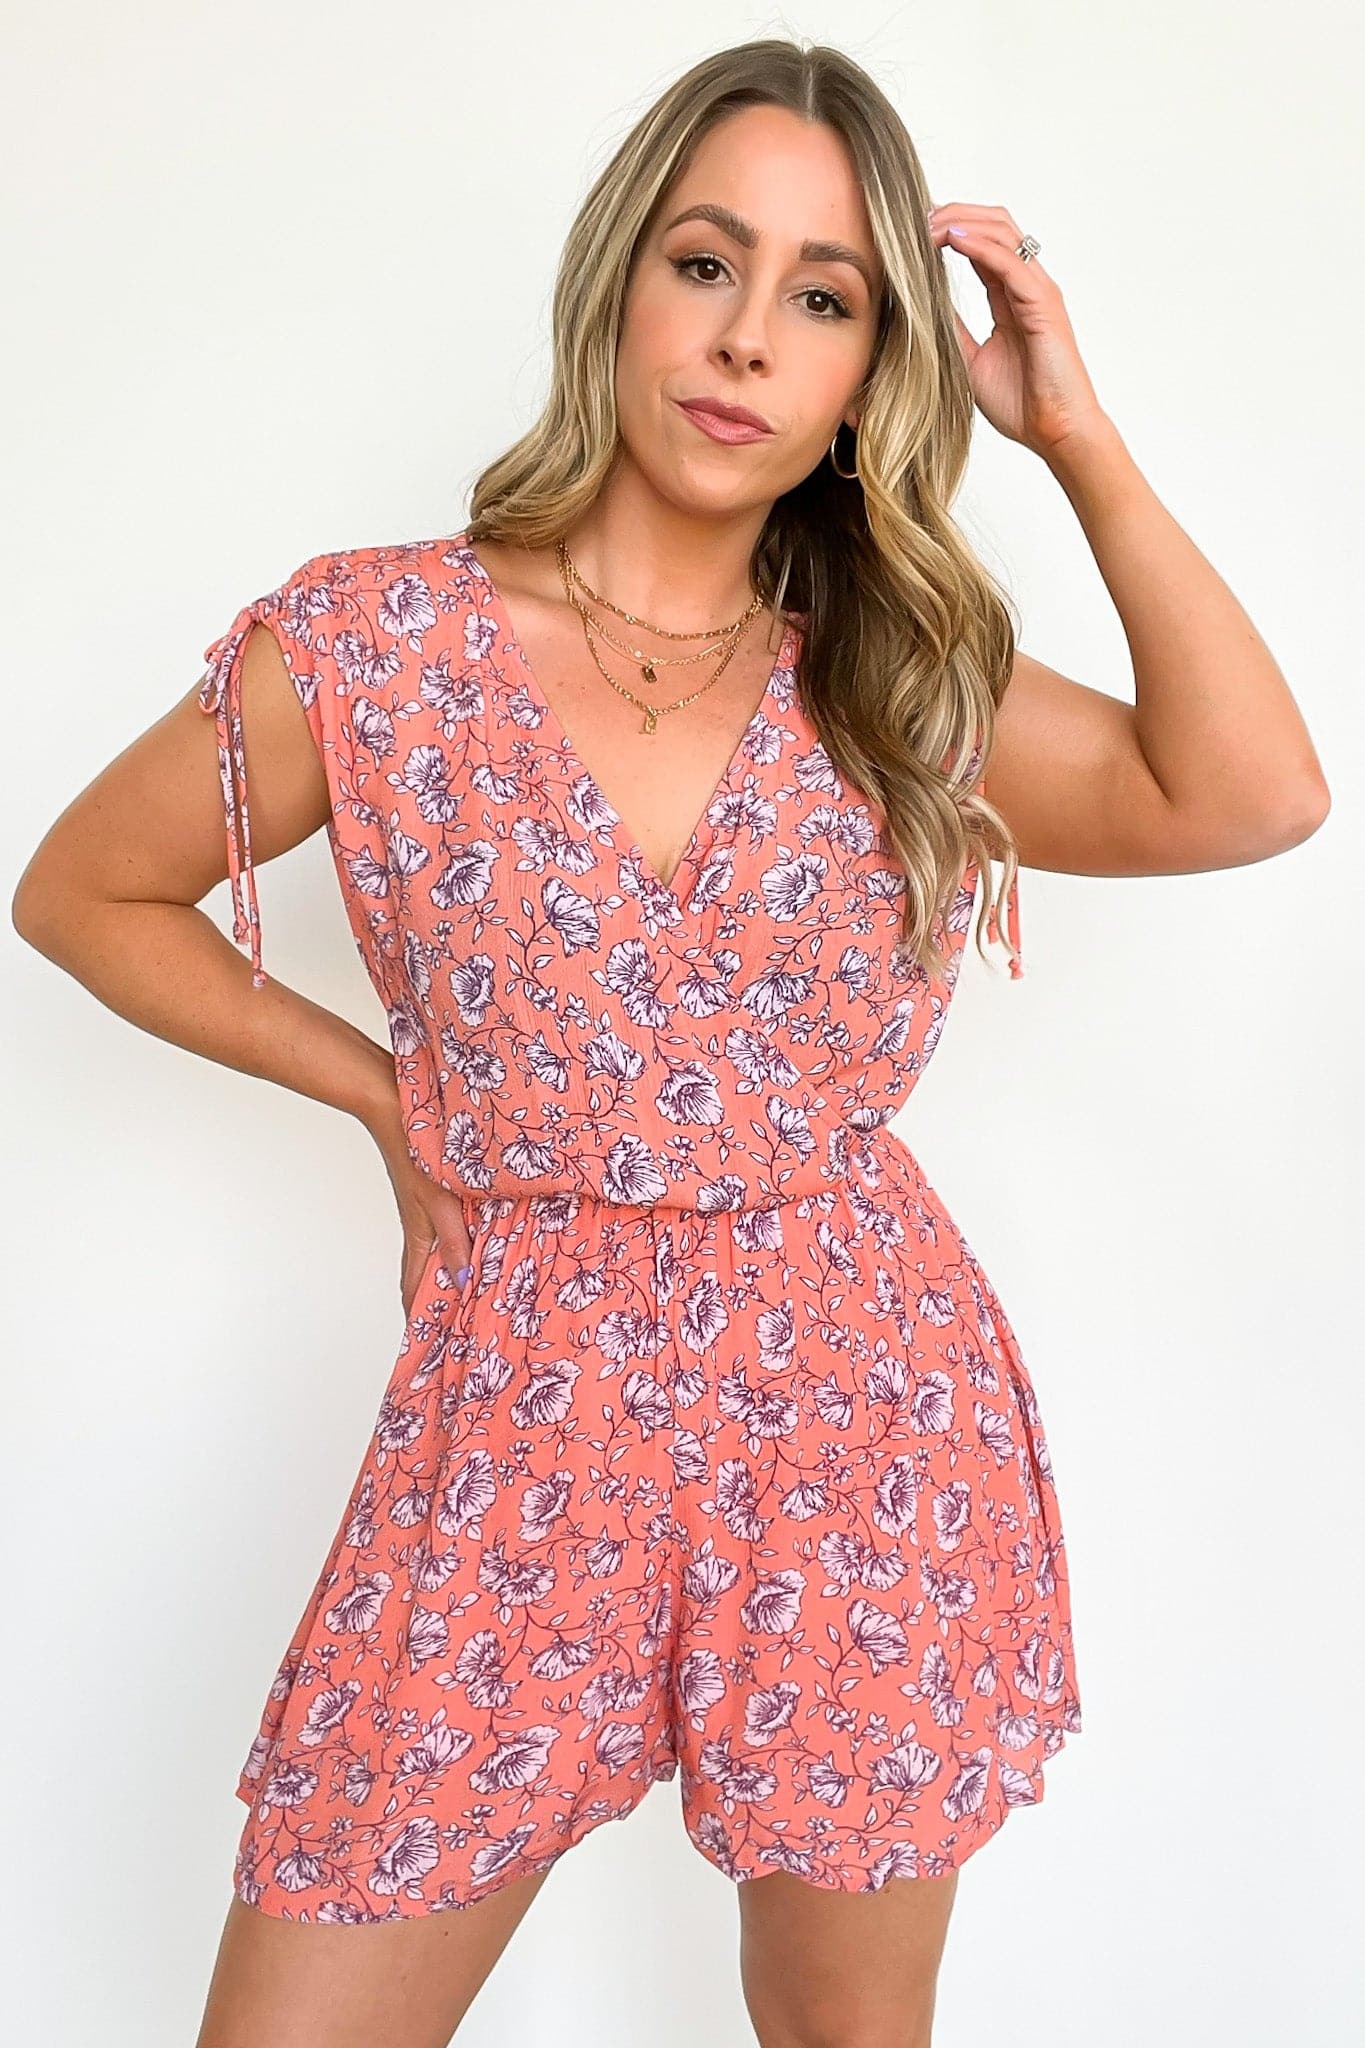  Sunshine Everywhere Floral Print Ruched Romper - FINAL SALE - Madison and Mallory